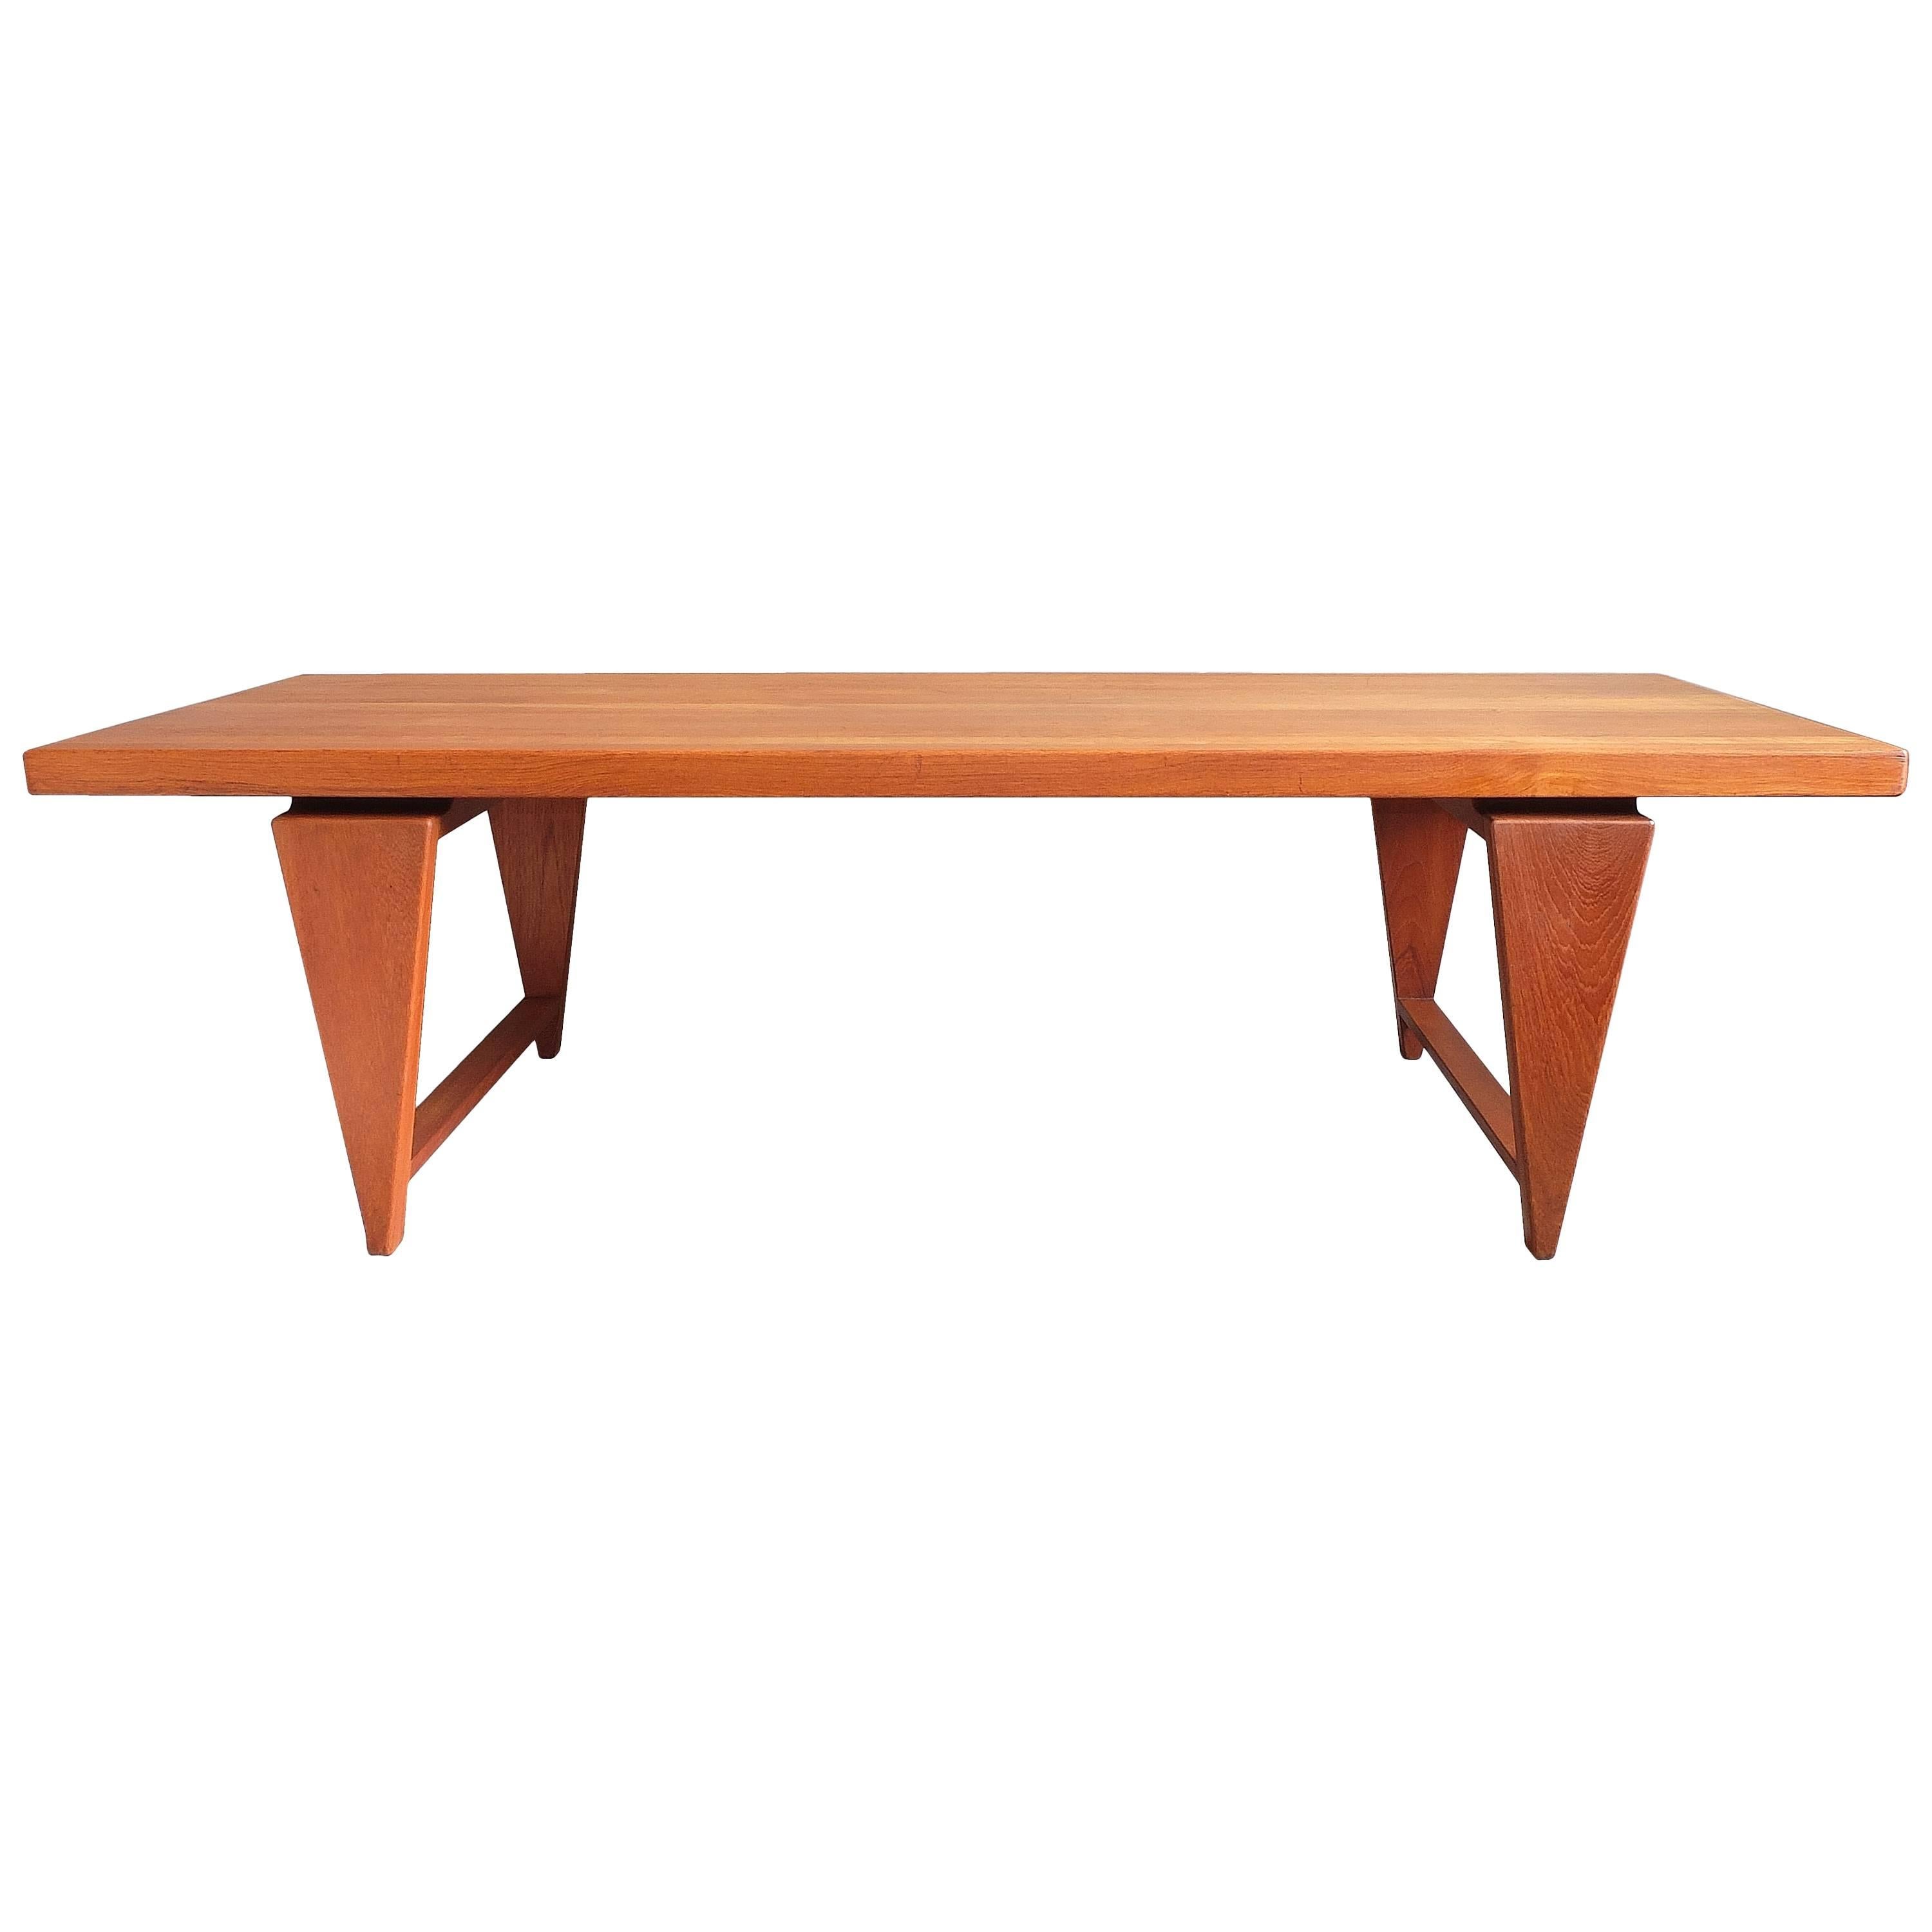 Illum Wikkelso Coffee Table Architectural Solid Teak 1960s Danish For Sale